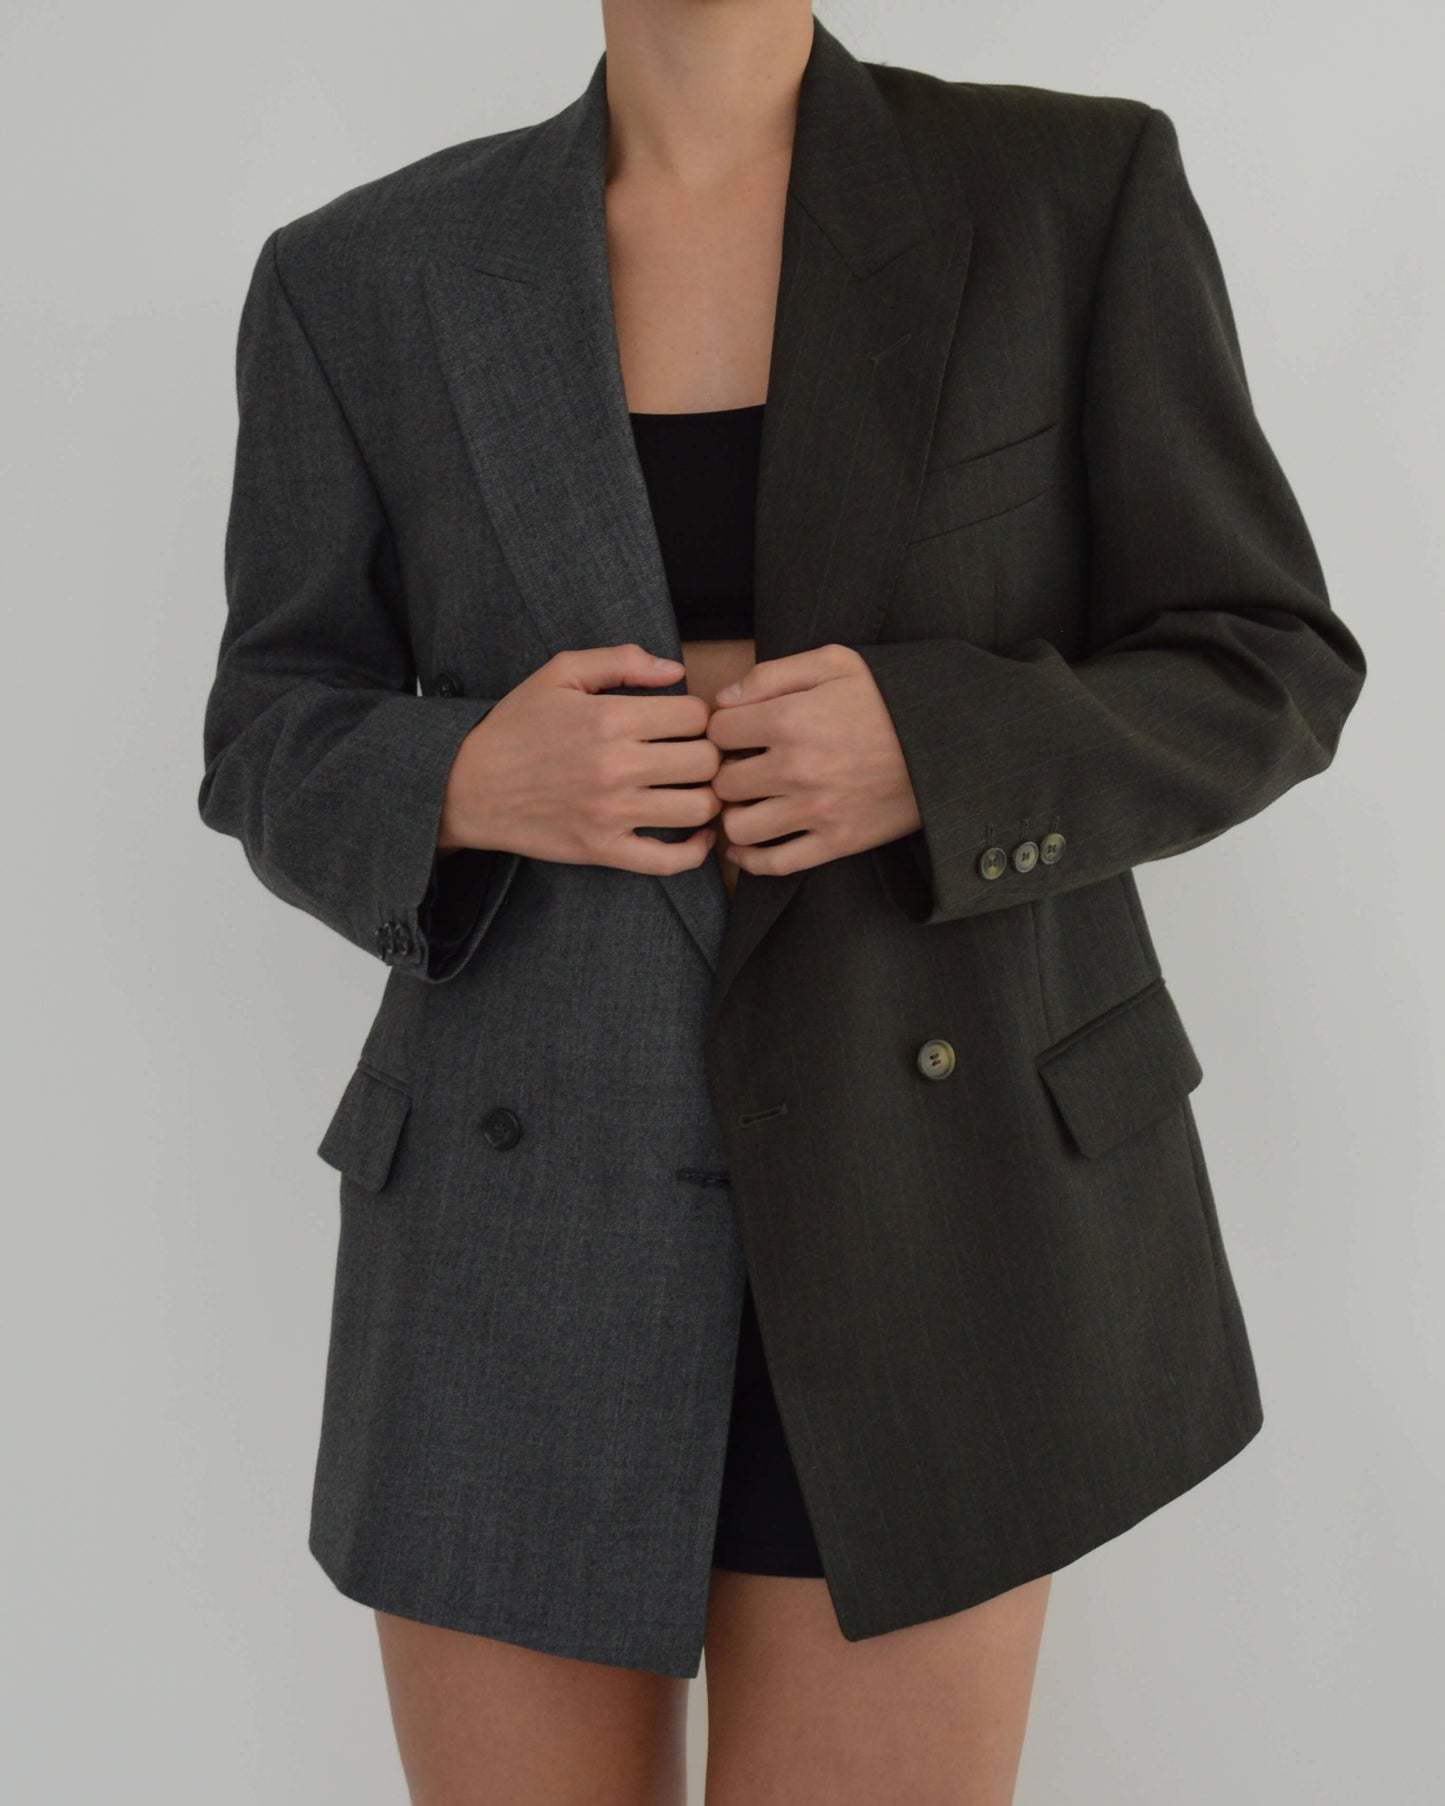 DUO Blazer - Double Breasted Contrast (S/L)